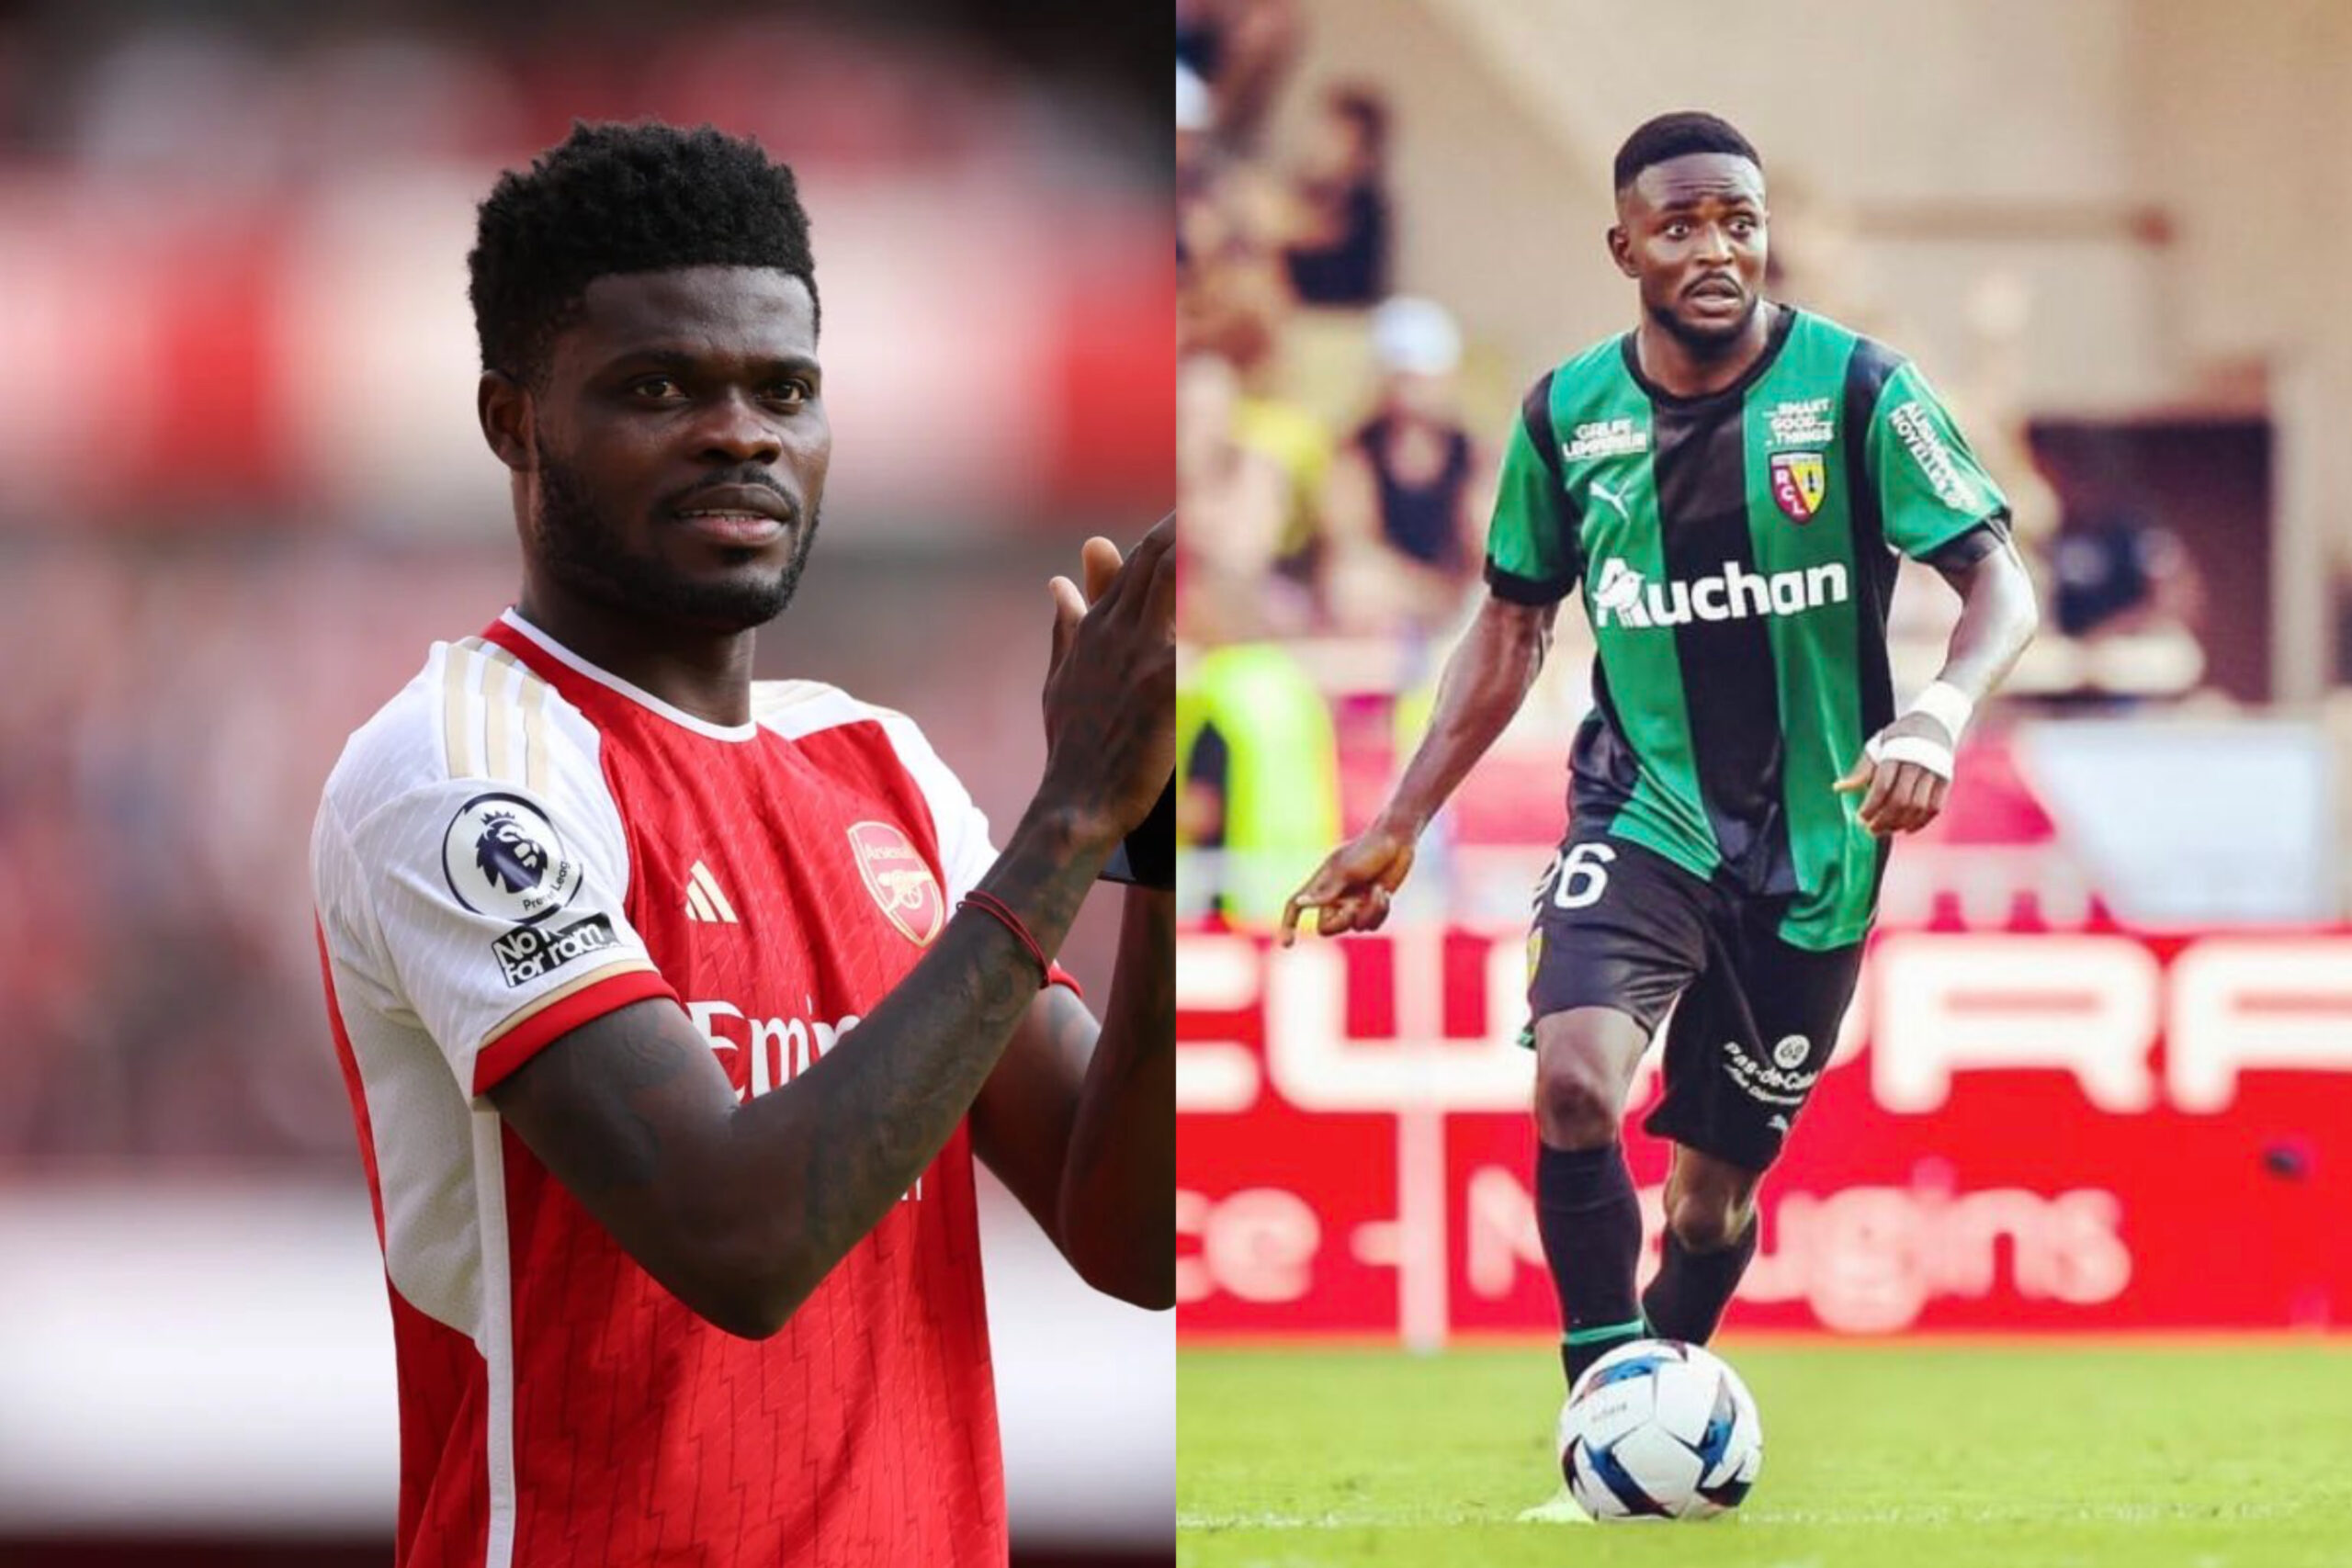 Champions League draw: Thomas Partey’s Arsenal pitched against Salis Abdul Samed’s Lens in Group B